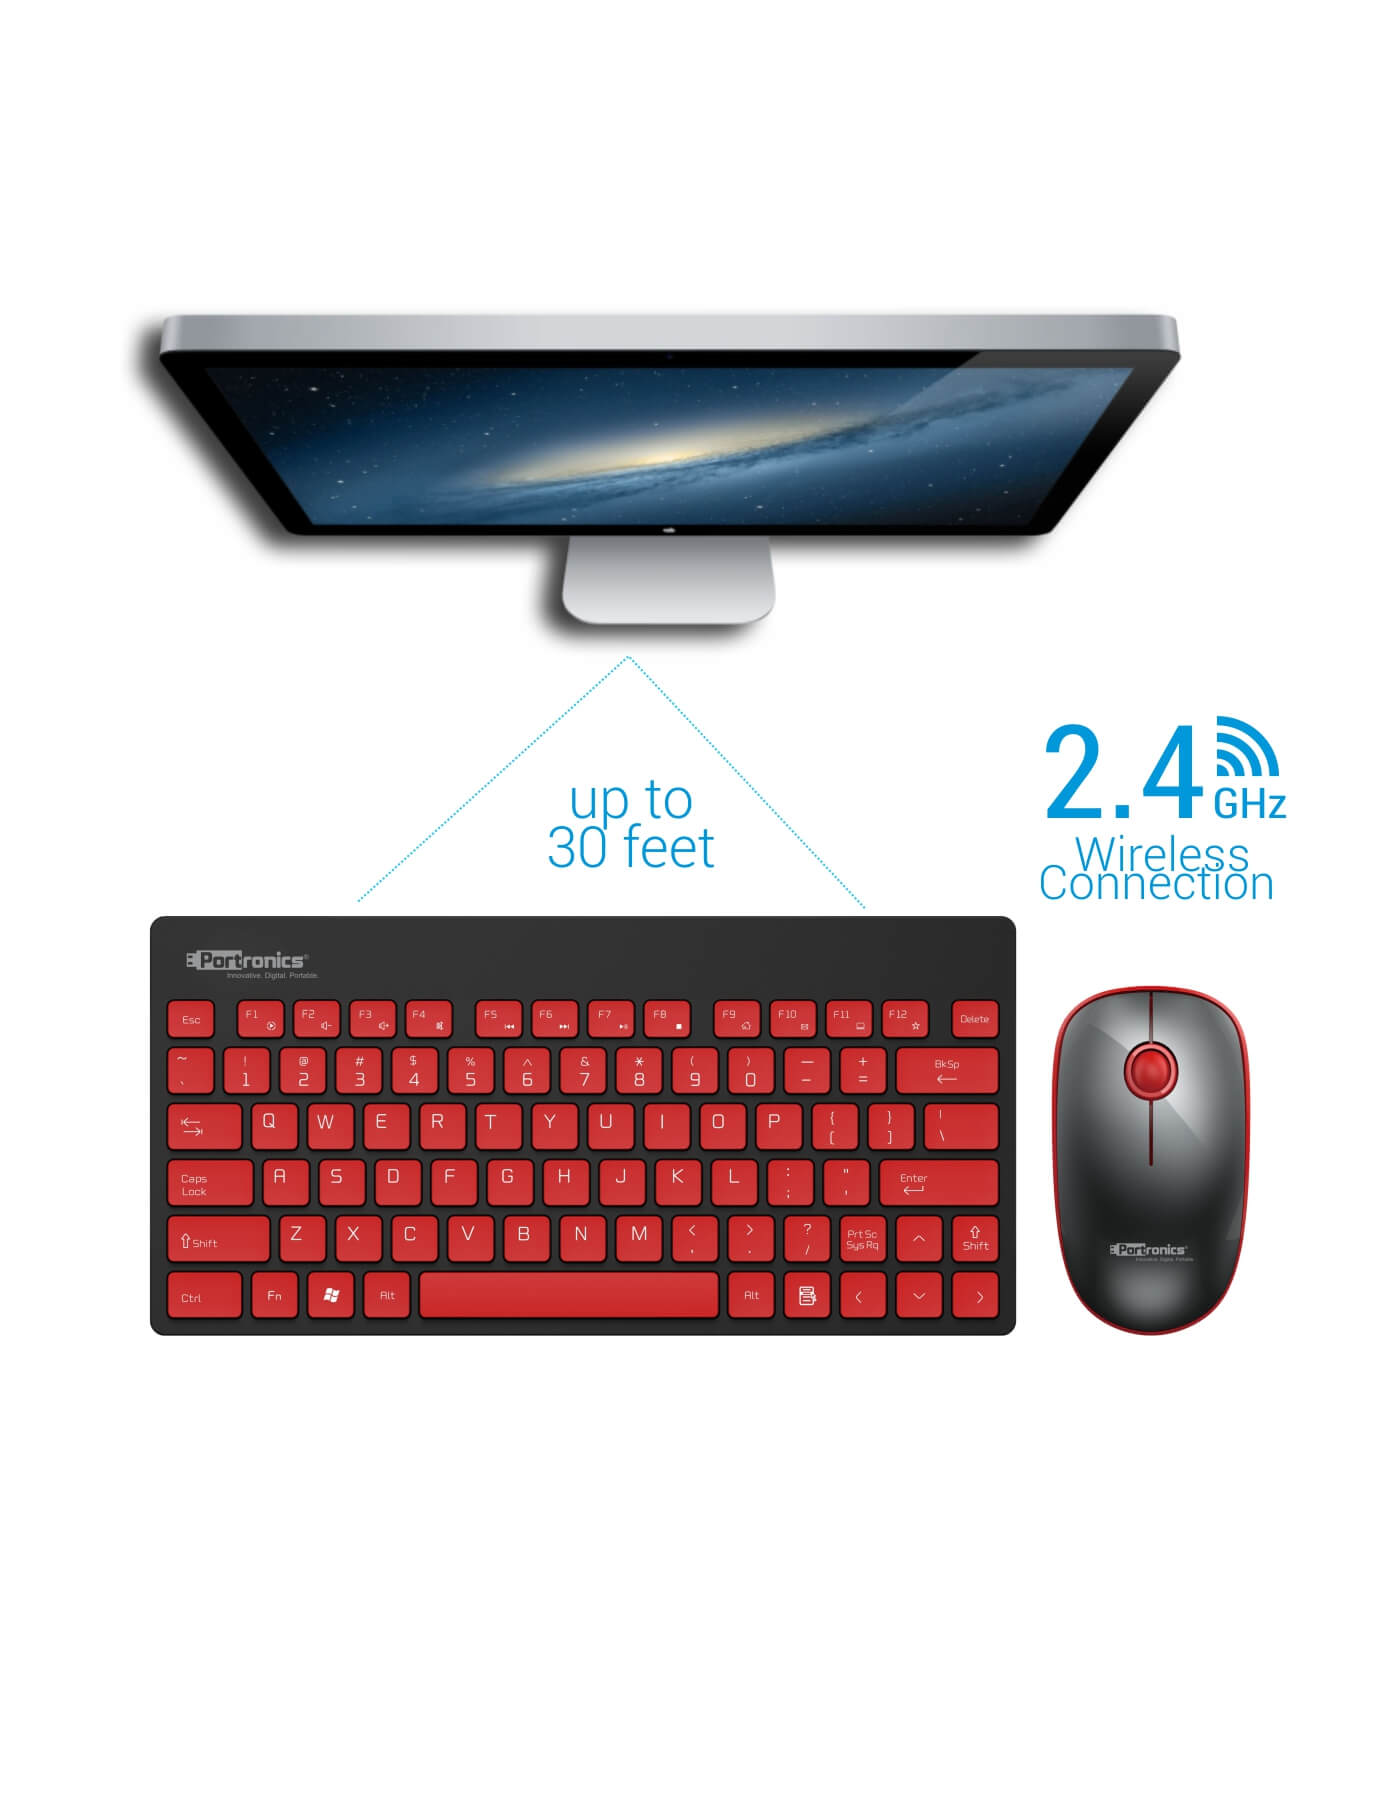 Portronics Key2 Combo Multimedia wireless mouse and keyboard Combo 30 feets connectivity